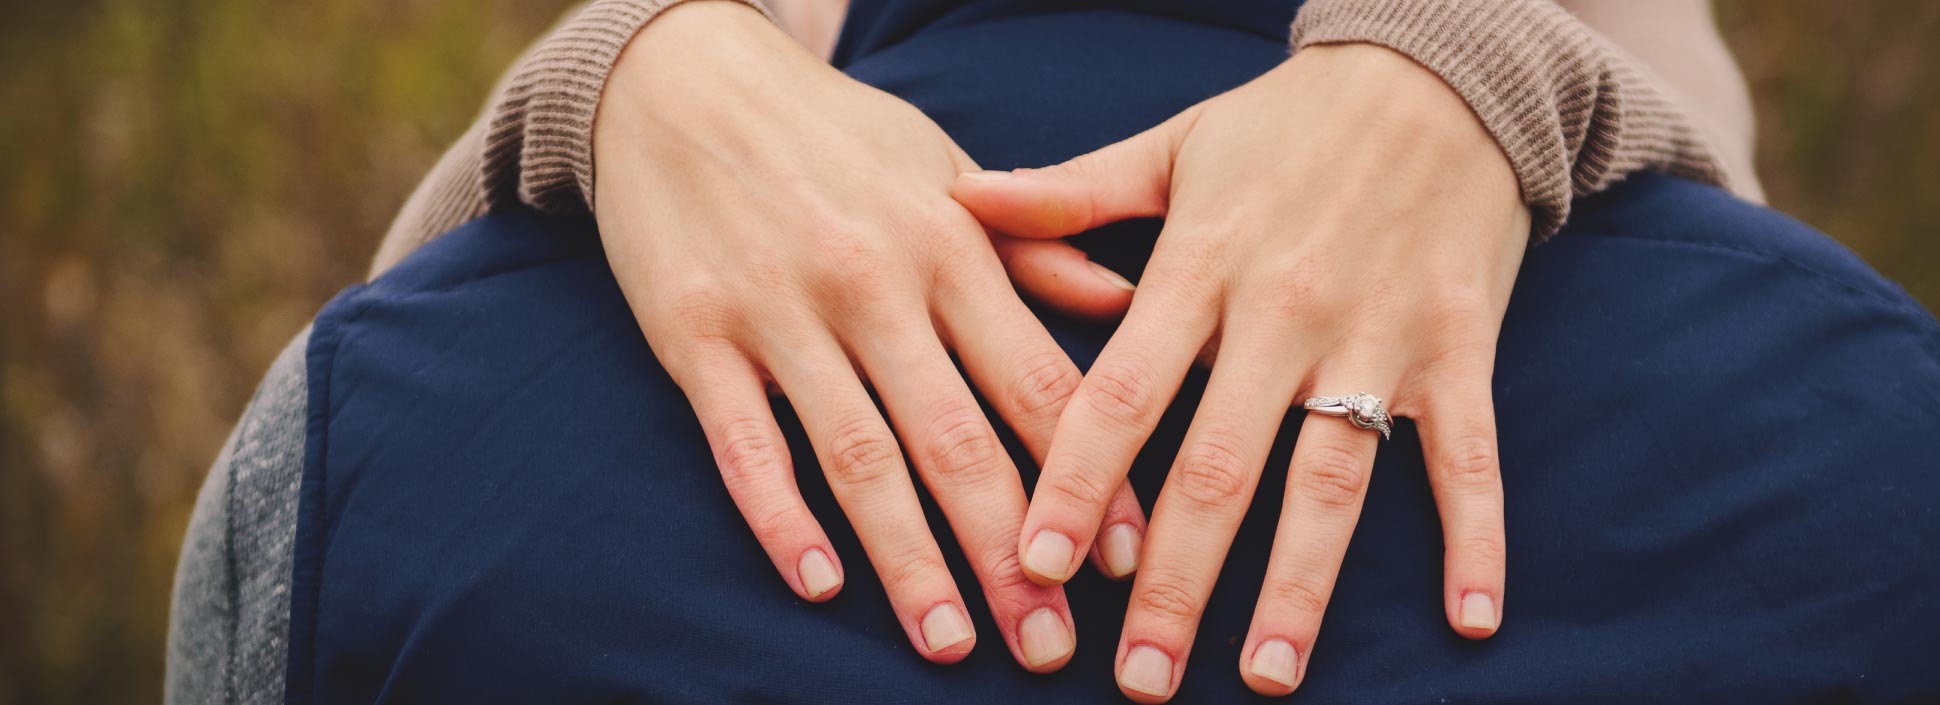 People are getting finger piercings instead of engagement rings - BBC Three